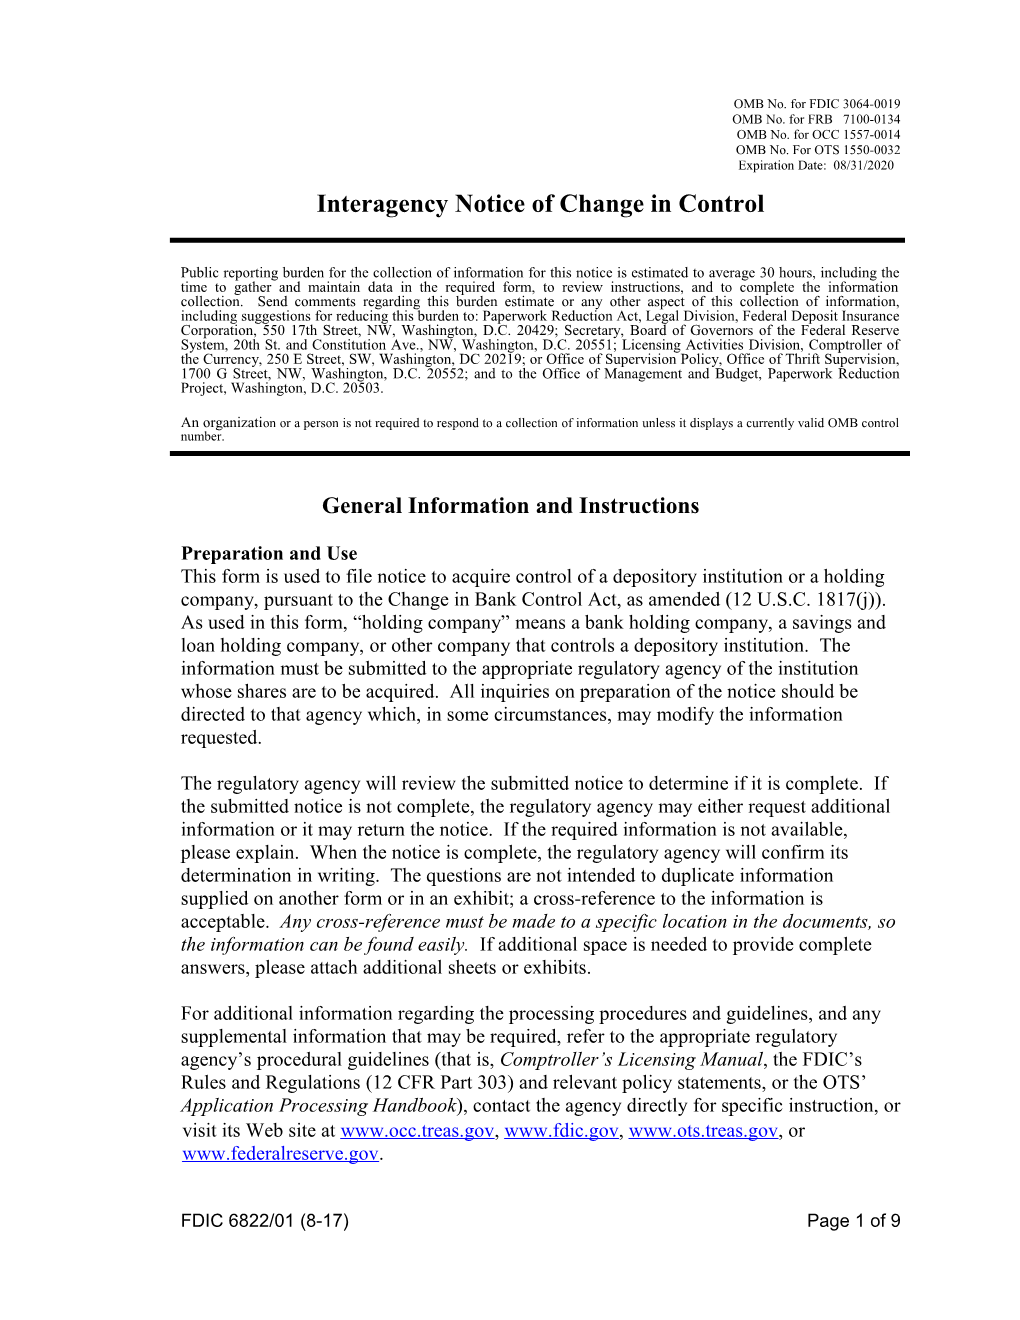 Interagency Notice Of Change In Control